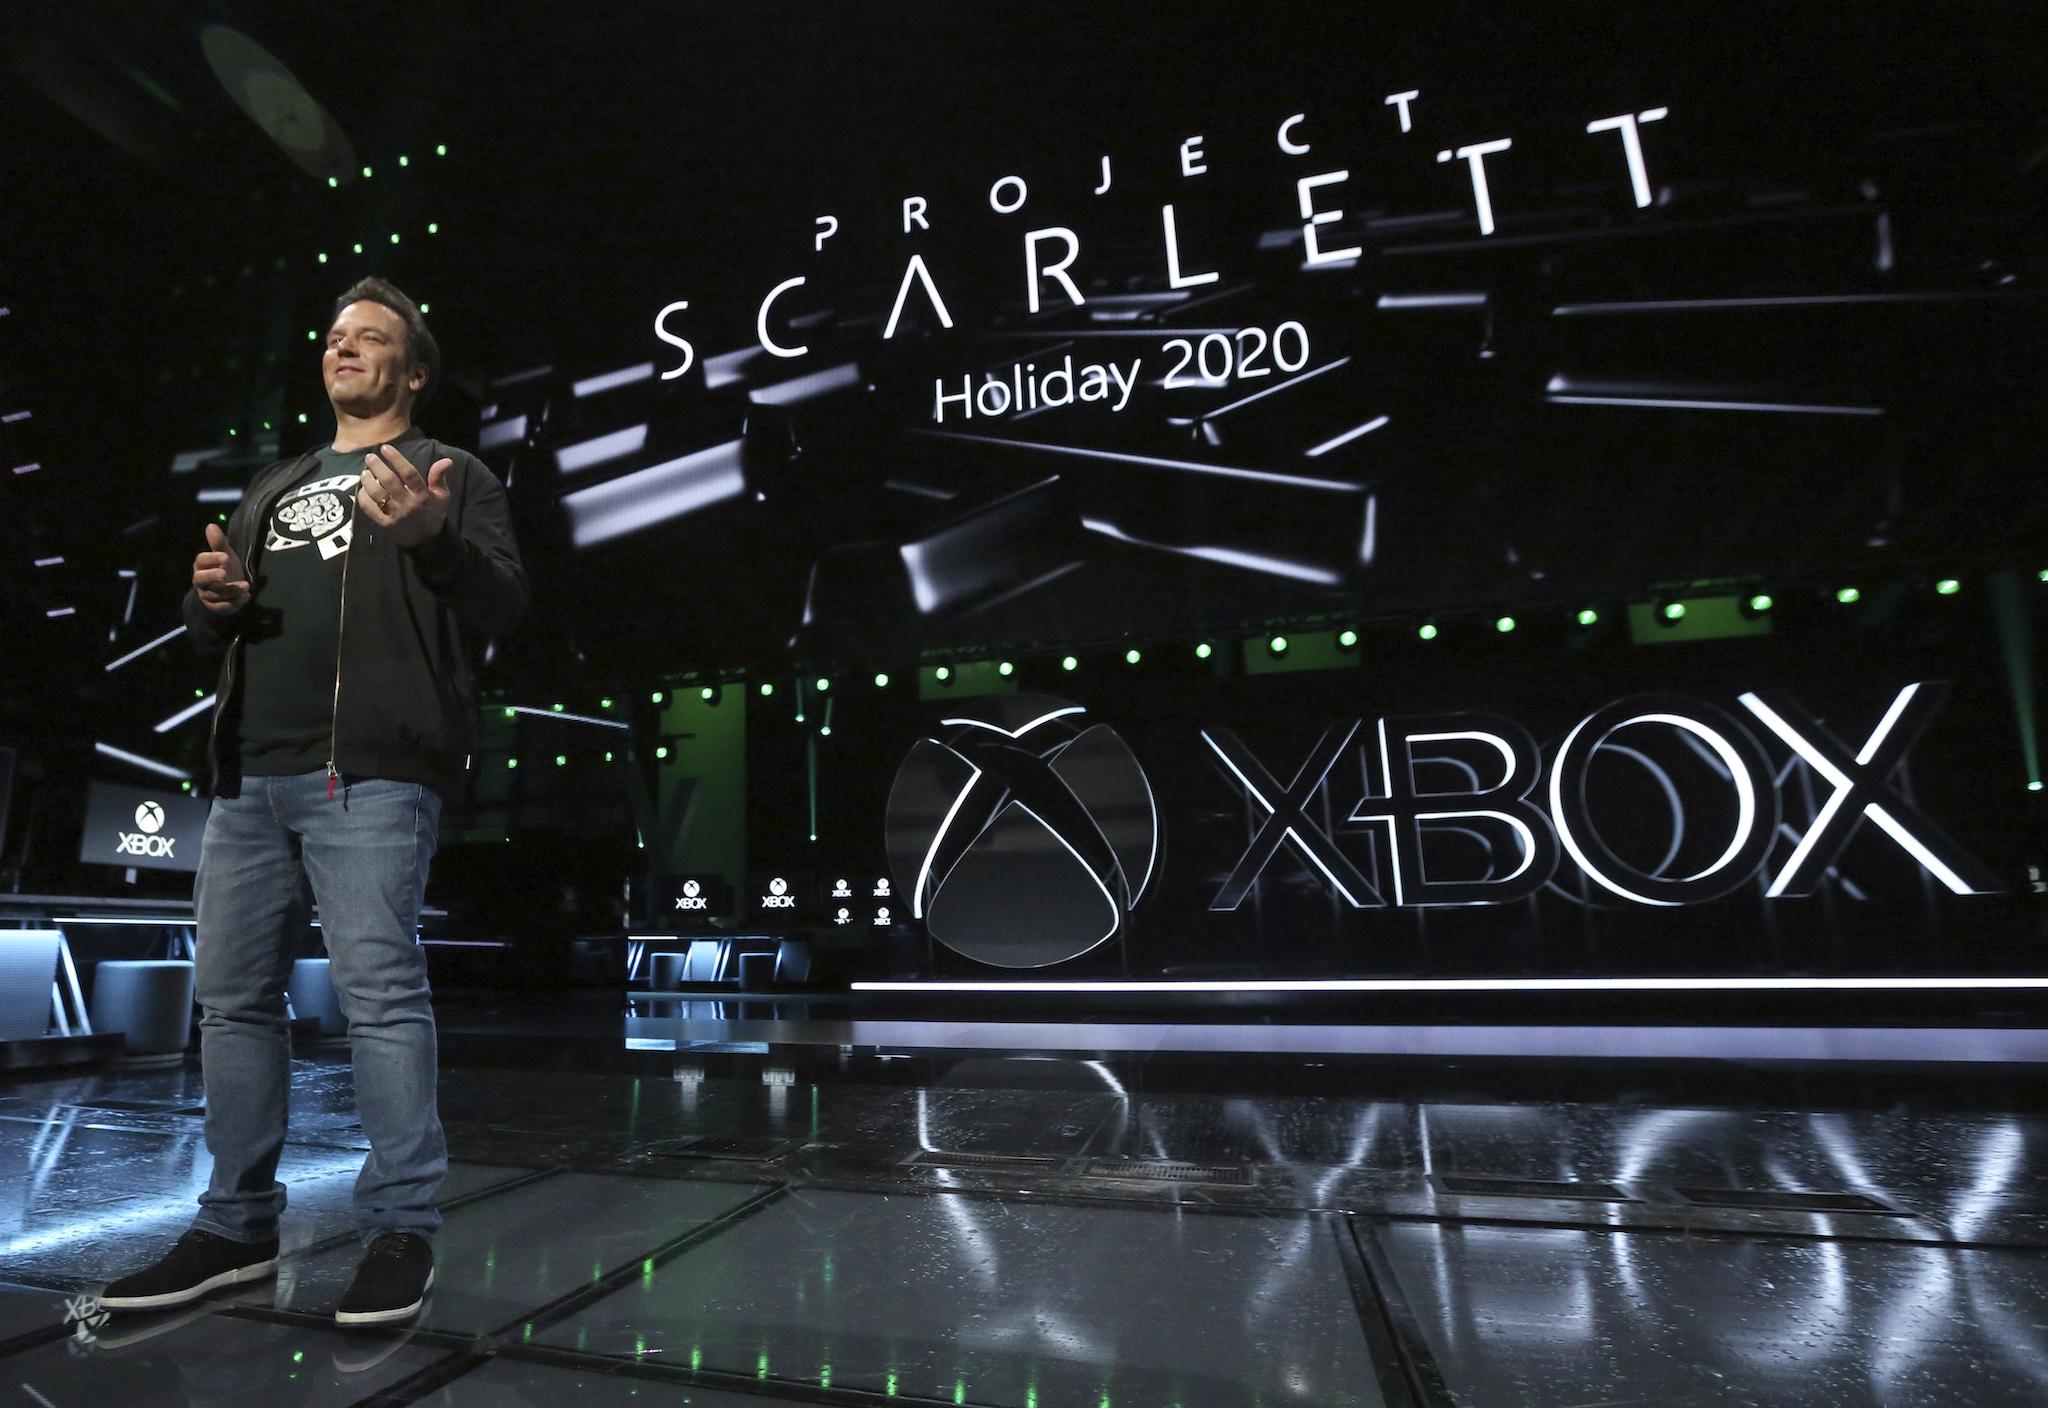 what is the release date for the xbox scarlett